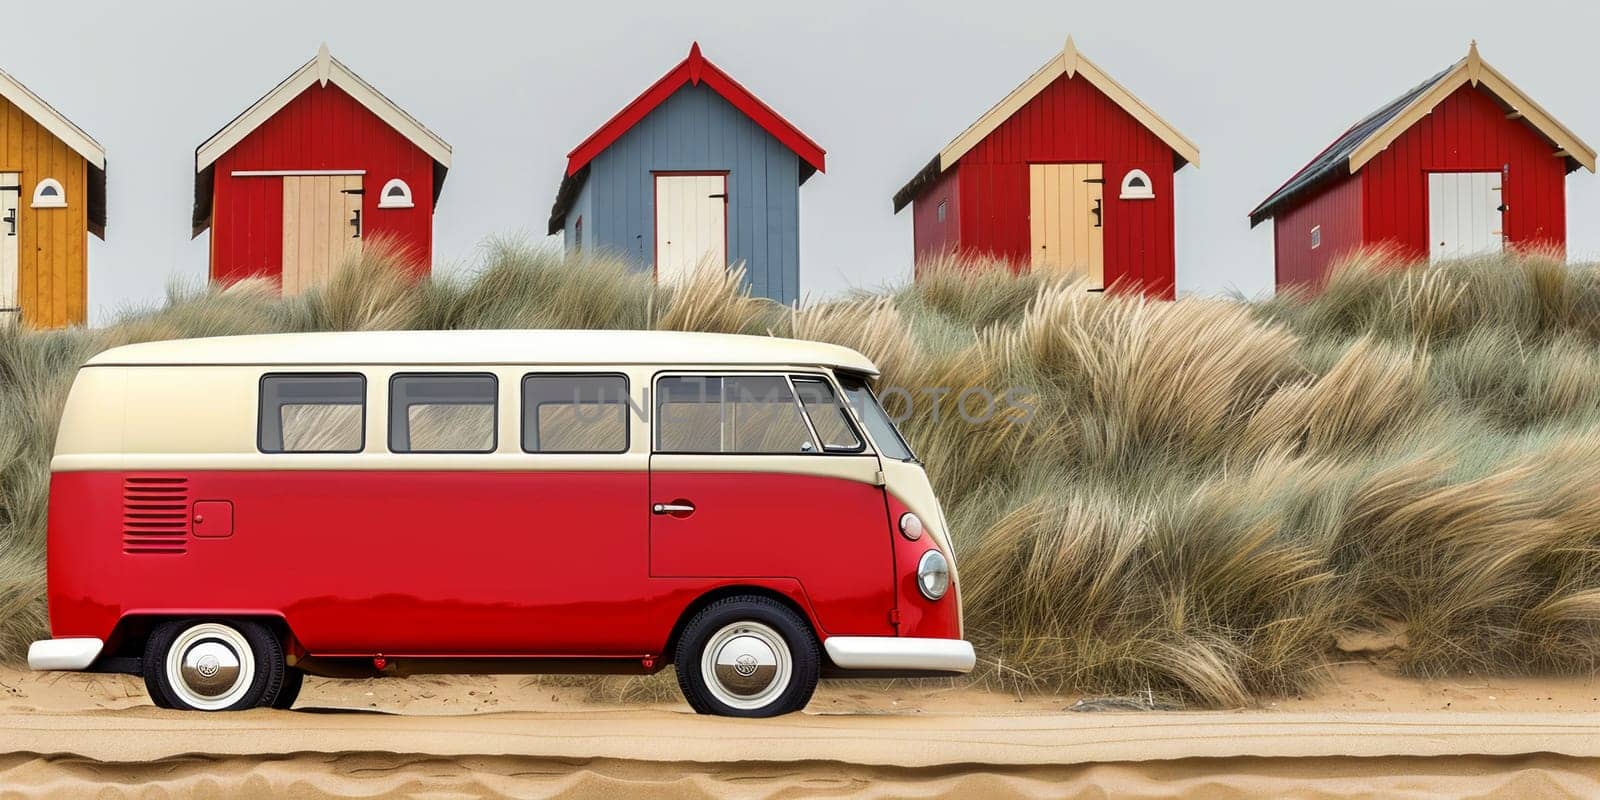 A vintage red and white VW bus is parked in front of a colorful row of beach huts, adding a retro touch to the seaside scene by but_photo